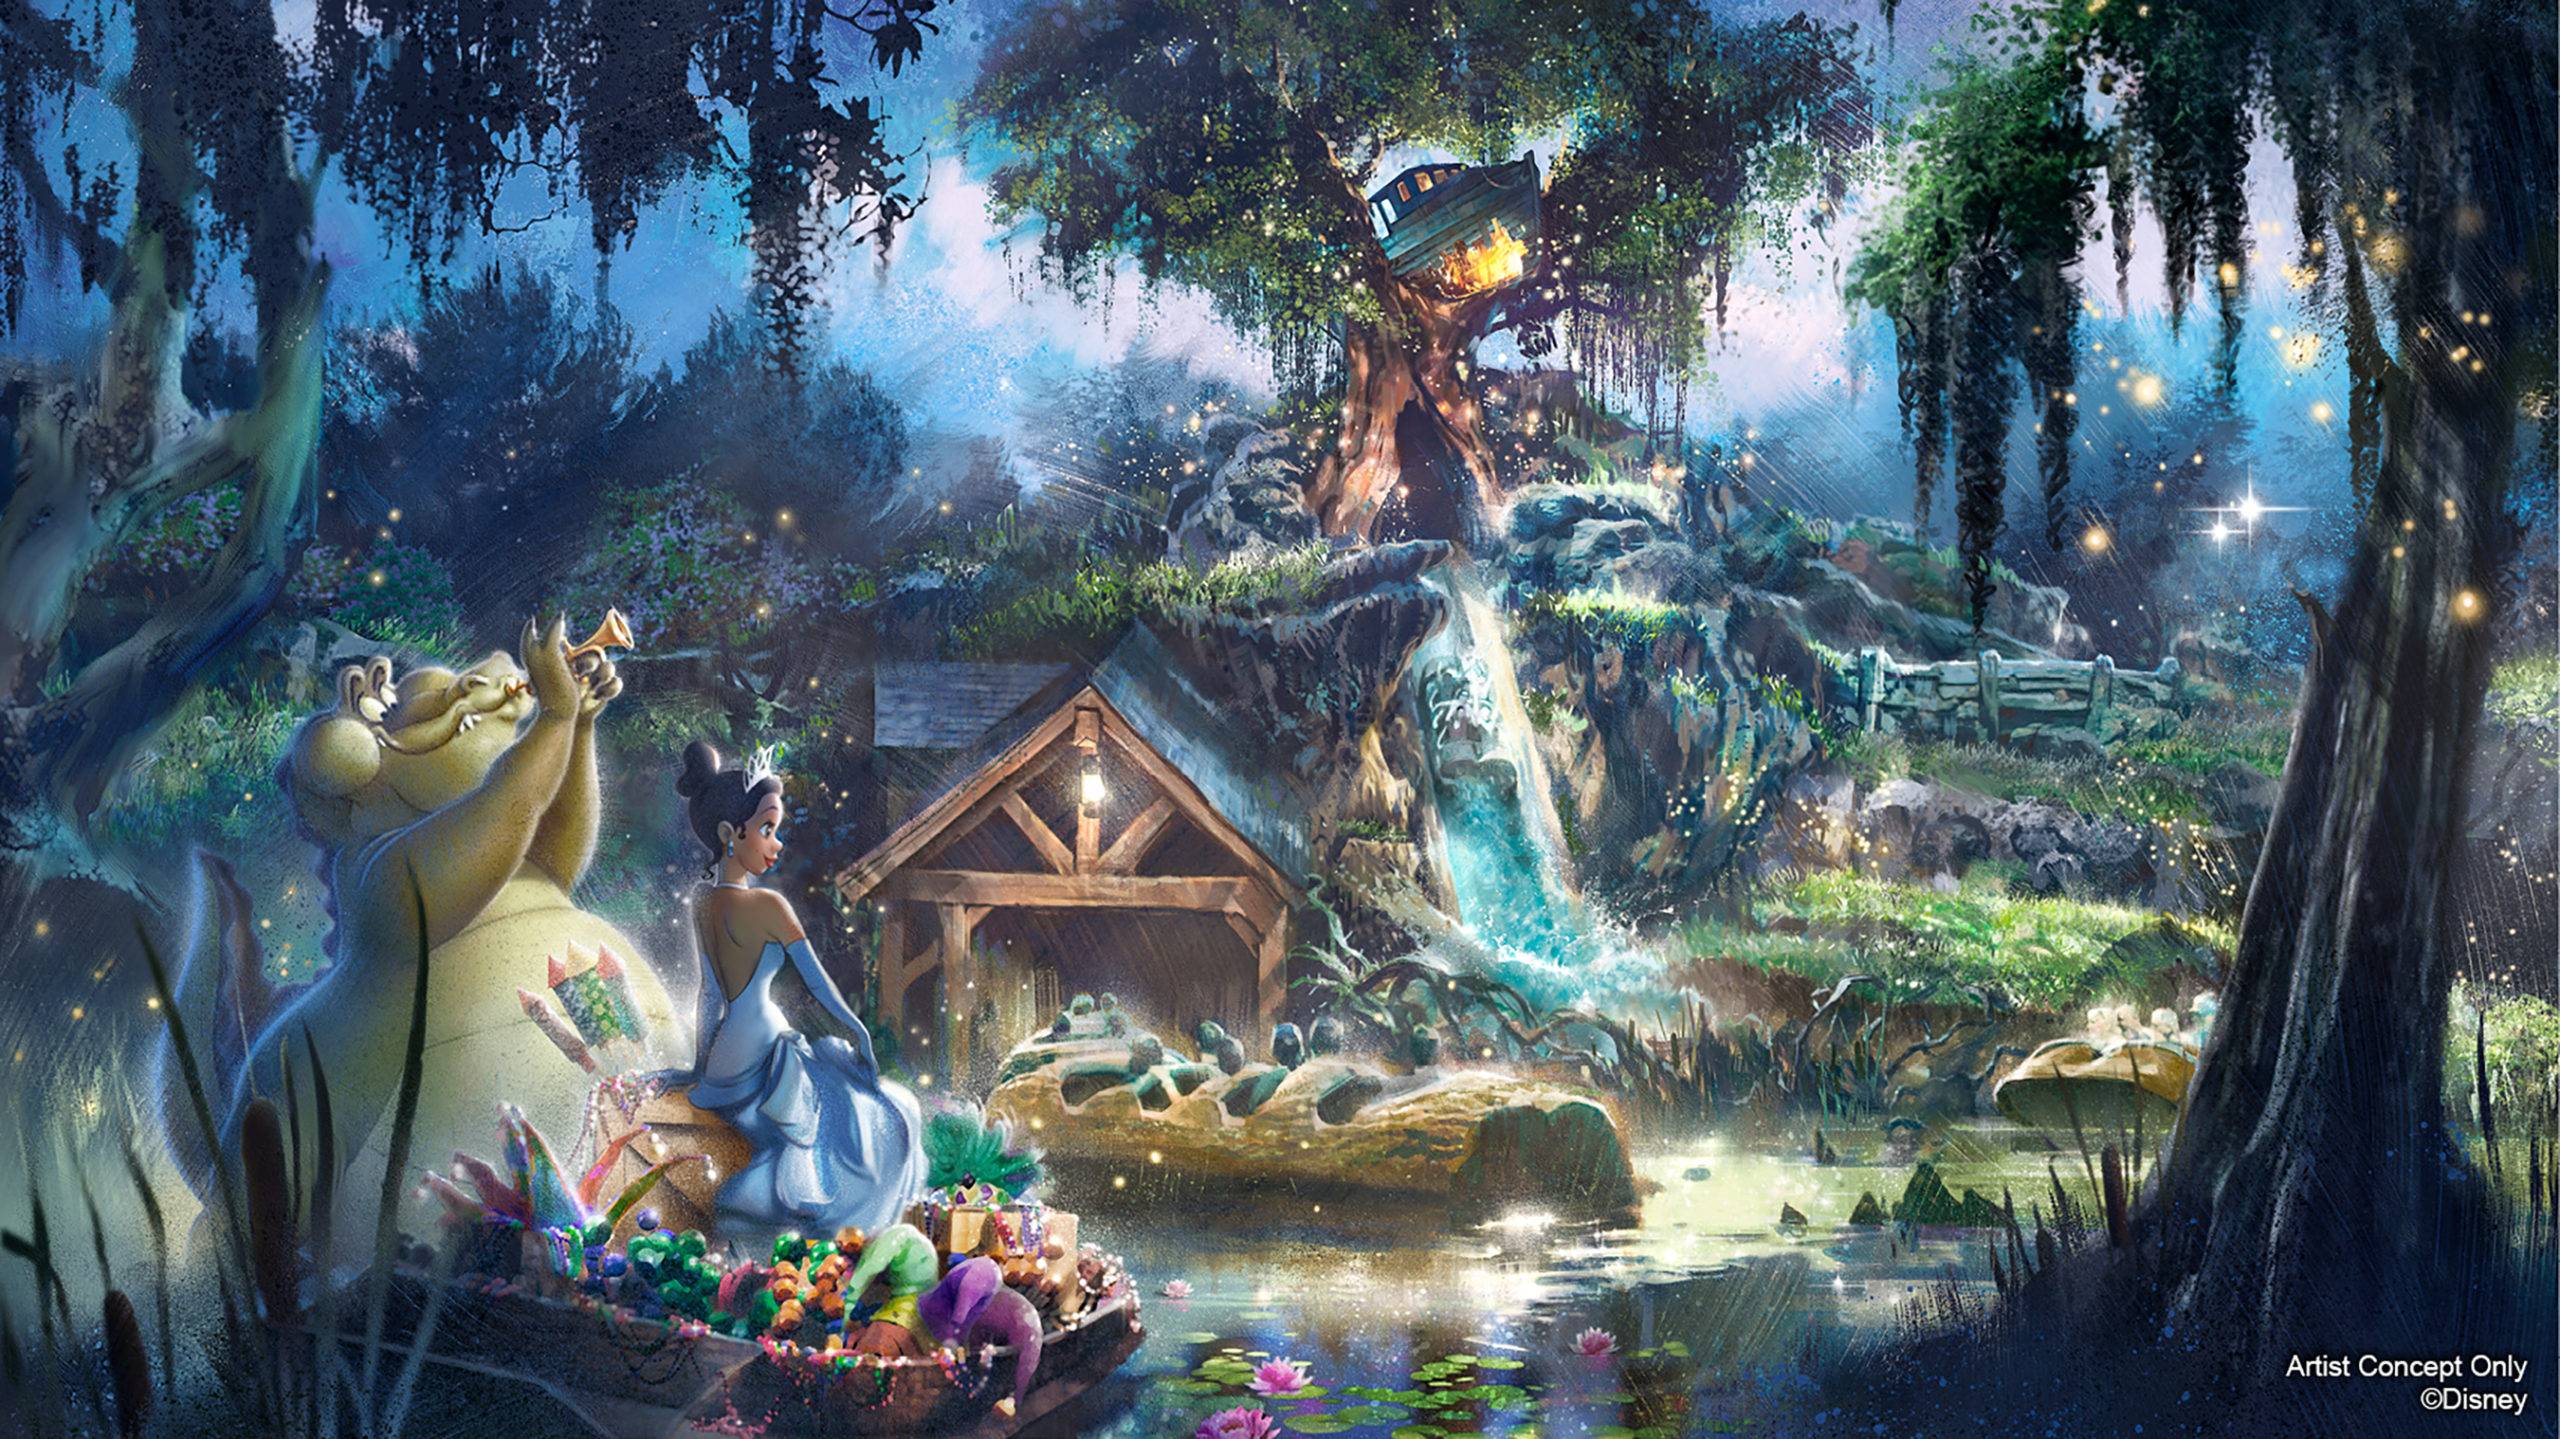 Magic Kingdom Vice President Melissa Valiquette comments on the progress being made on the reimagining of Splash Mountain at Walt Disney World